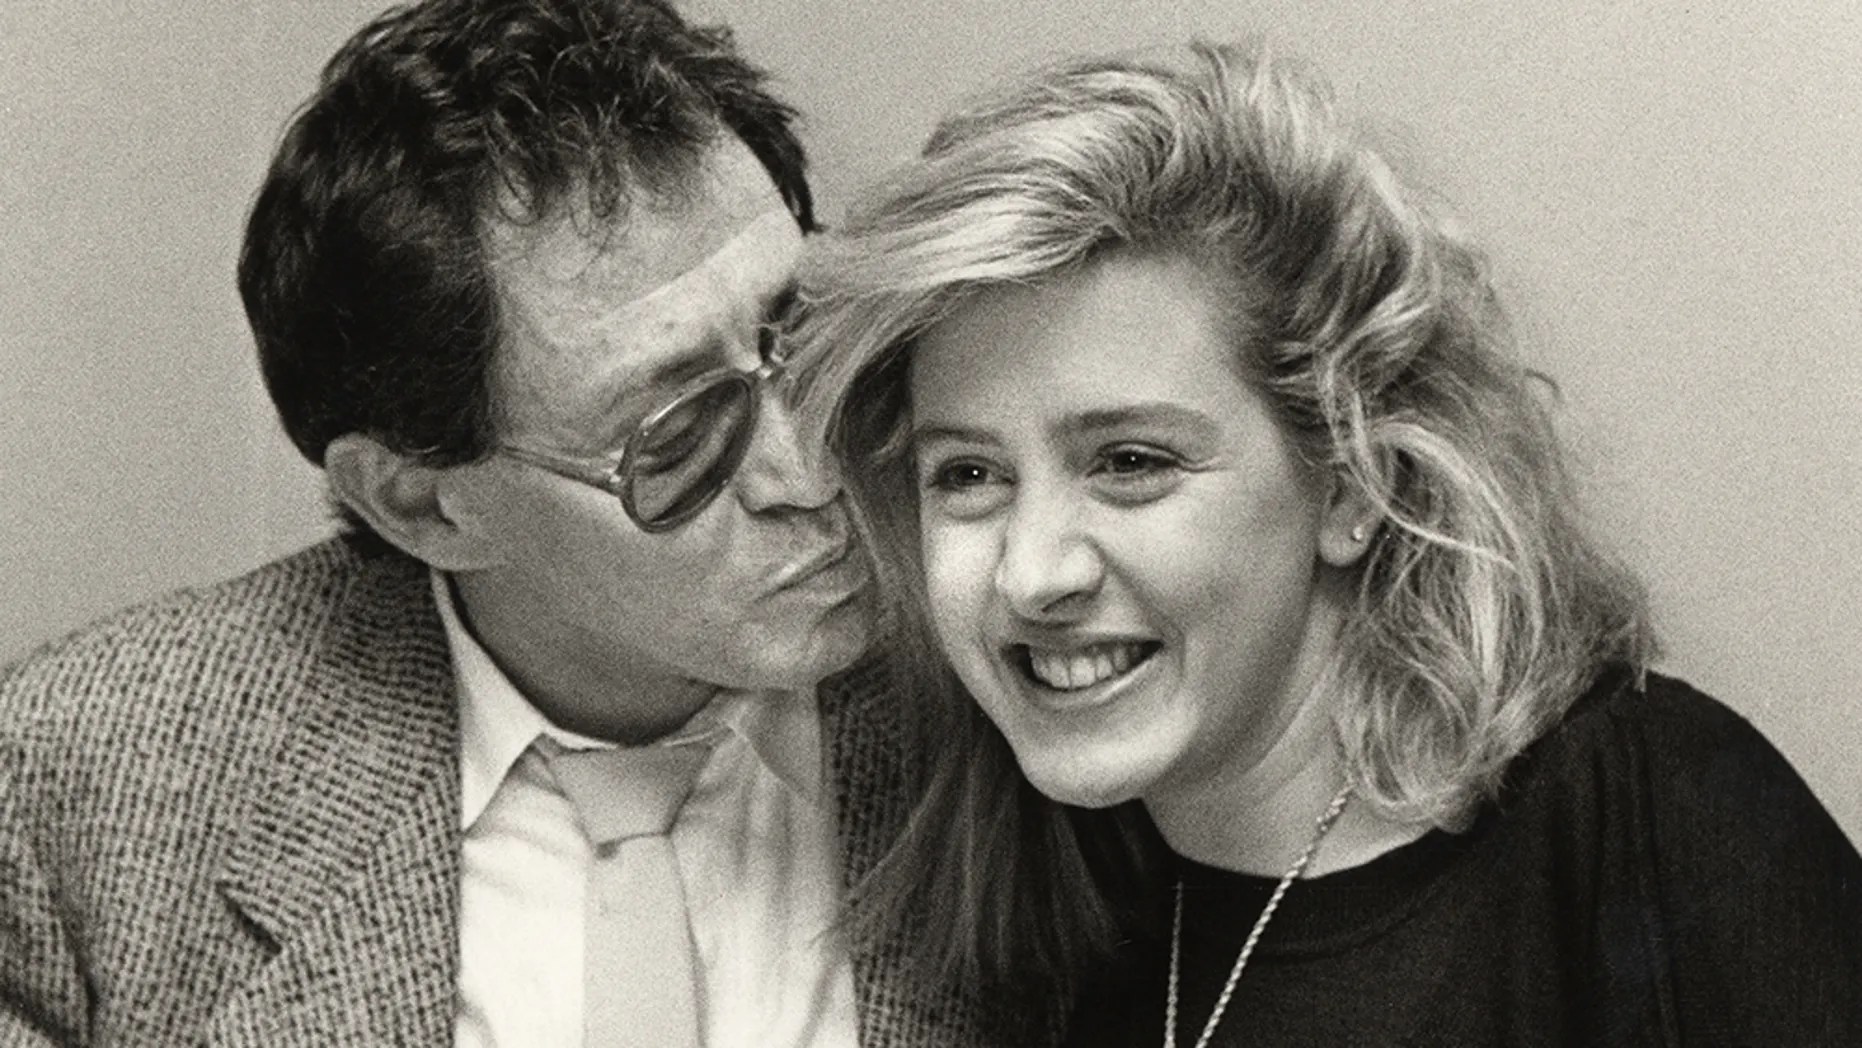 Joely Fisher says dad Eddie Fisher wrote apology letter for exposing